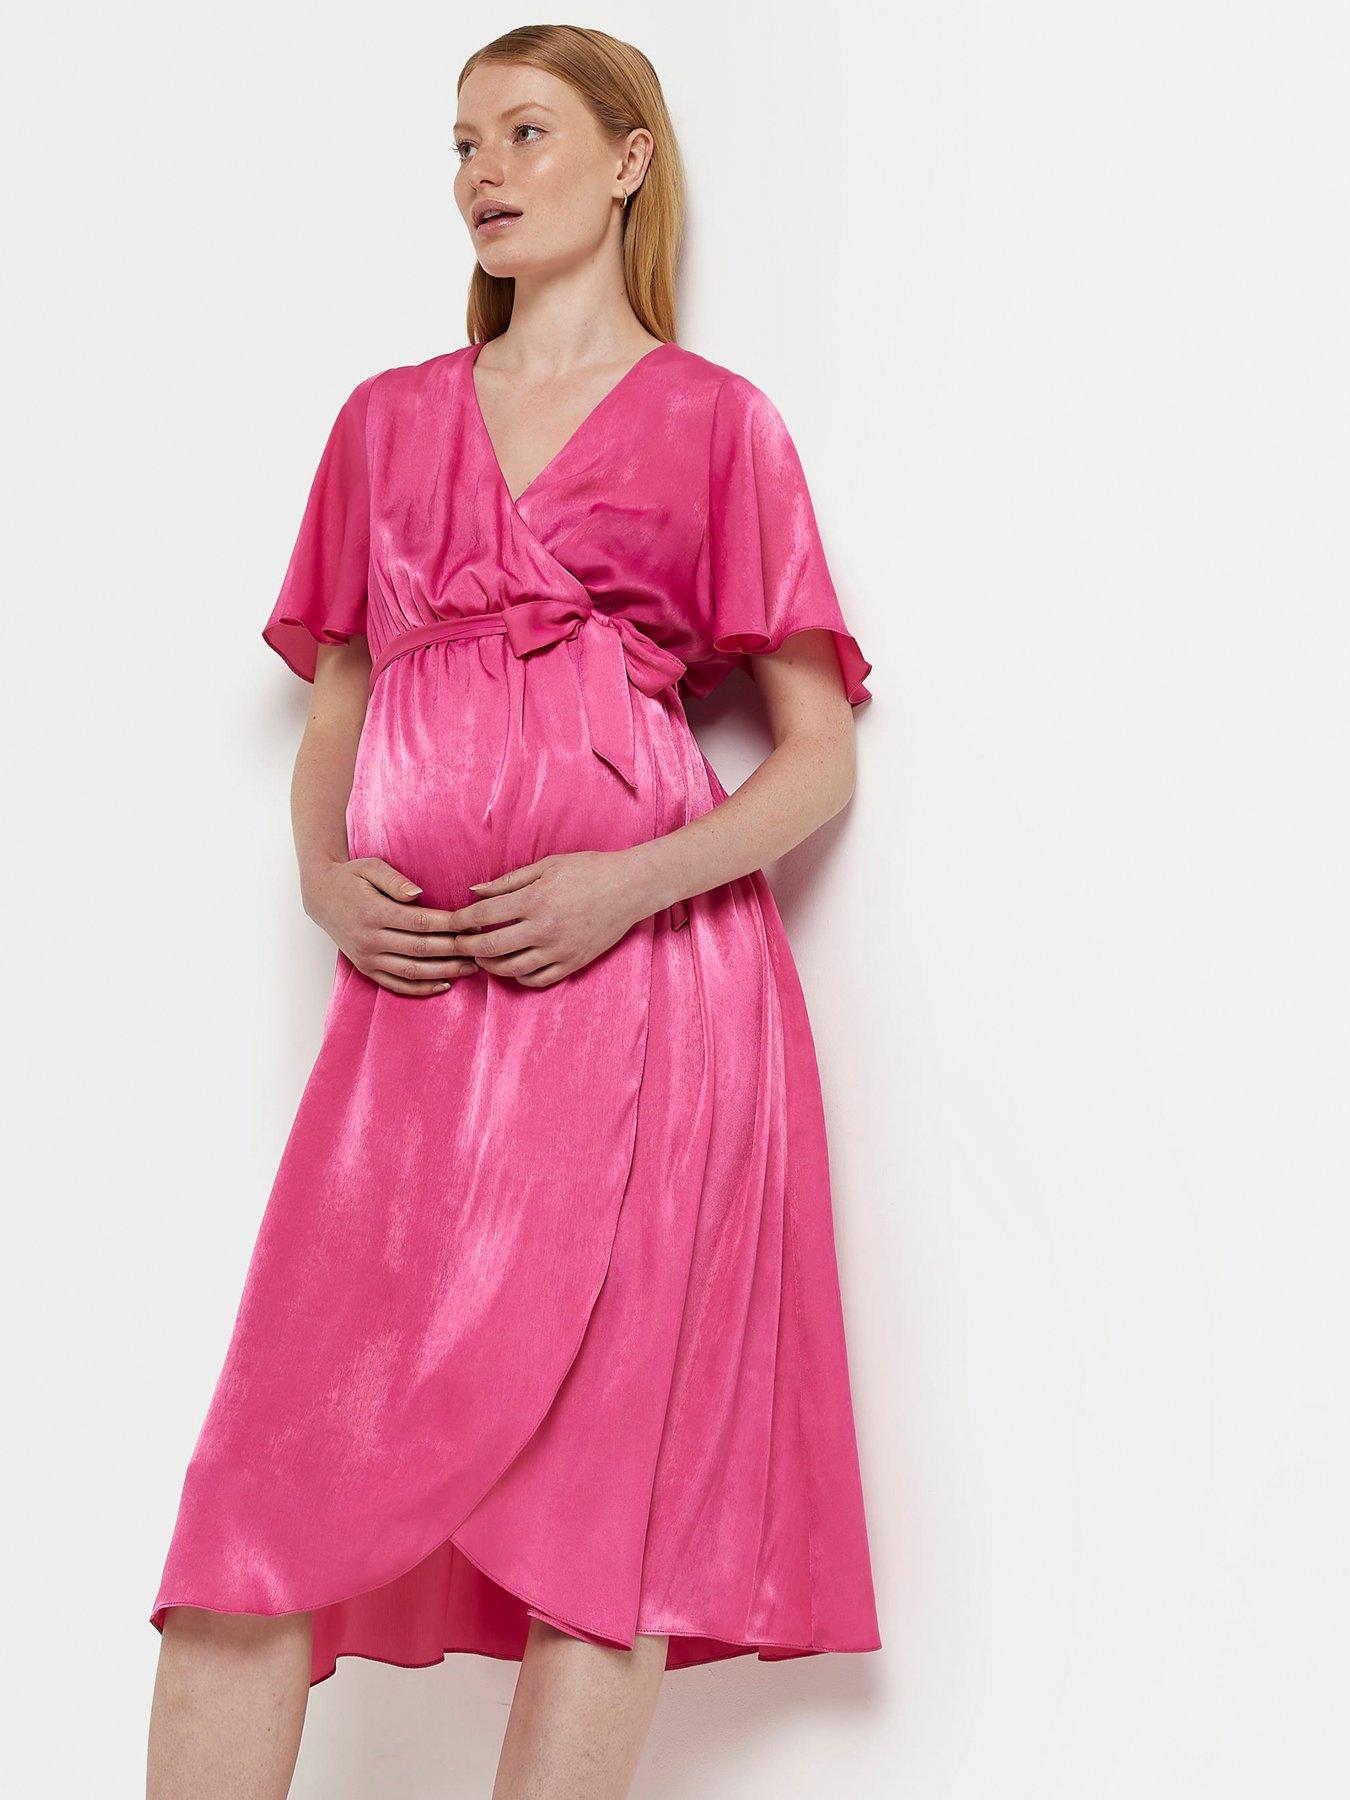 8 Maternity Fabric Wraps ideas  maternity, maternity inspiration, maternity  pictures